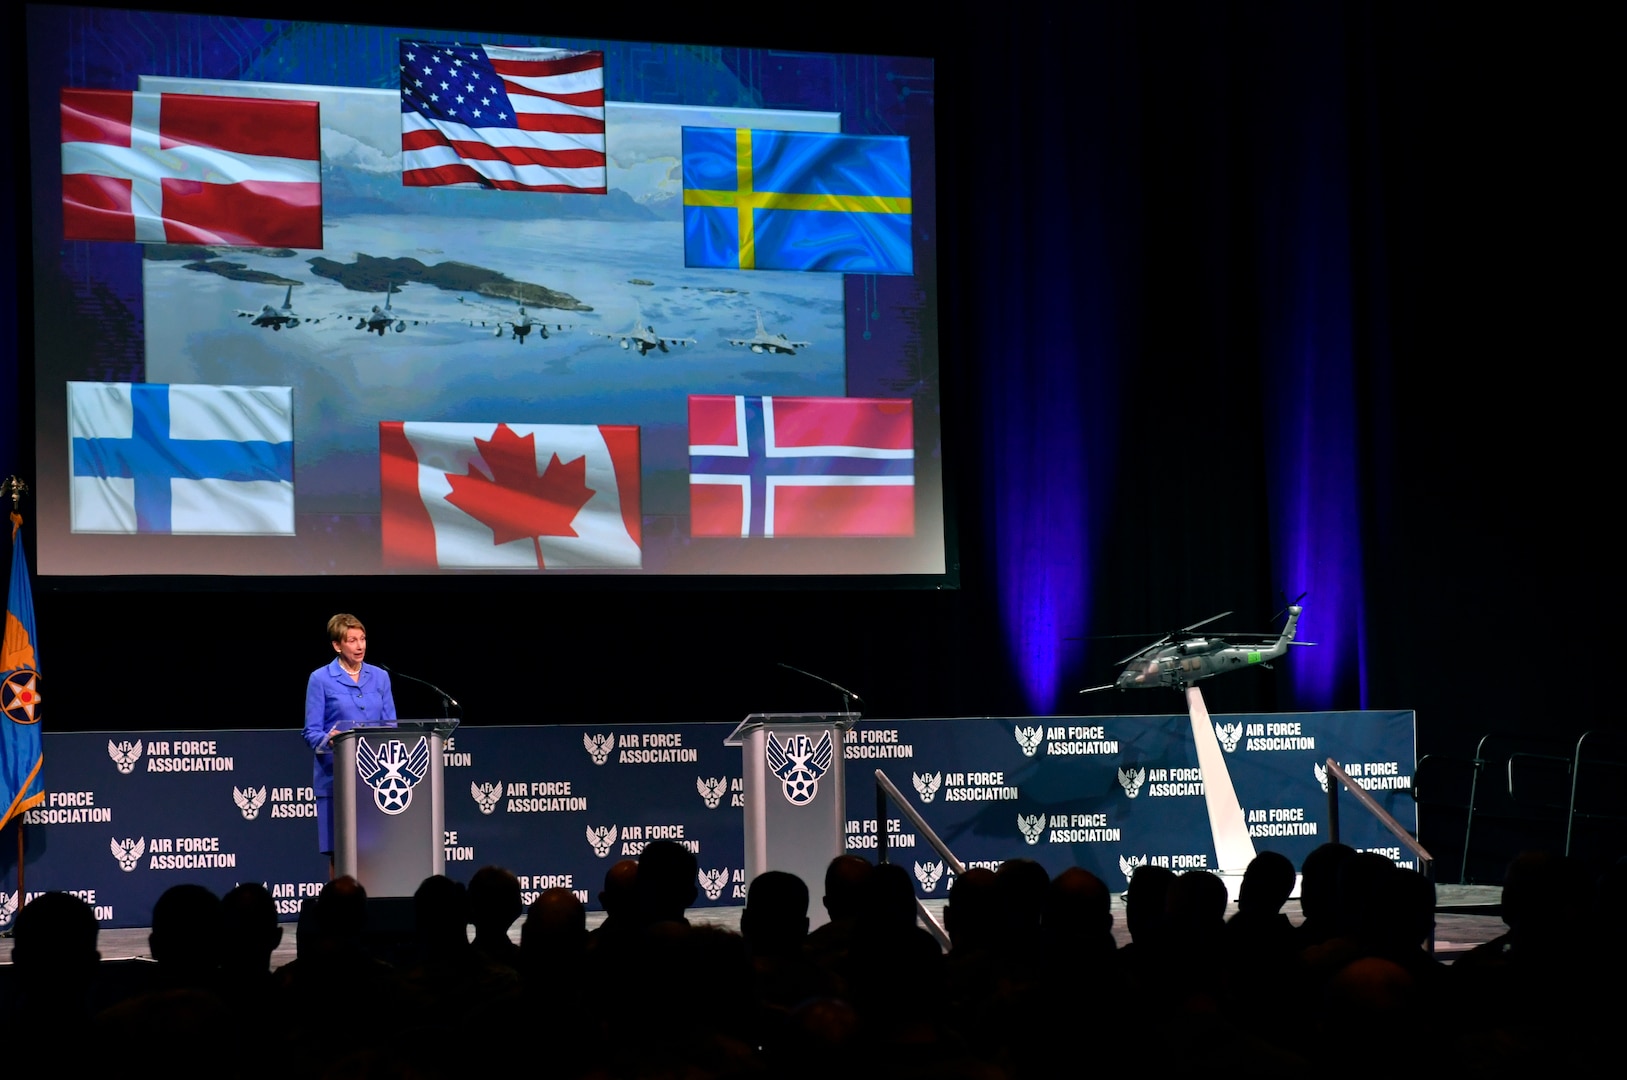 Secretary of the Air Force Barbara Barrett delivers remarks during the Air Force Association’s Air Warfare Symposium in Orlando, Fla., Feb. 27, 2020. The three-day event is a professional development forum that offers the opportunity for Department of Defense personnel to participate in forums, speeches, seminars and workshops with defense industry professionals. (U.S. Air Force photo by Wayne Clark)